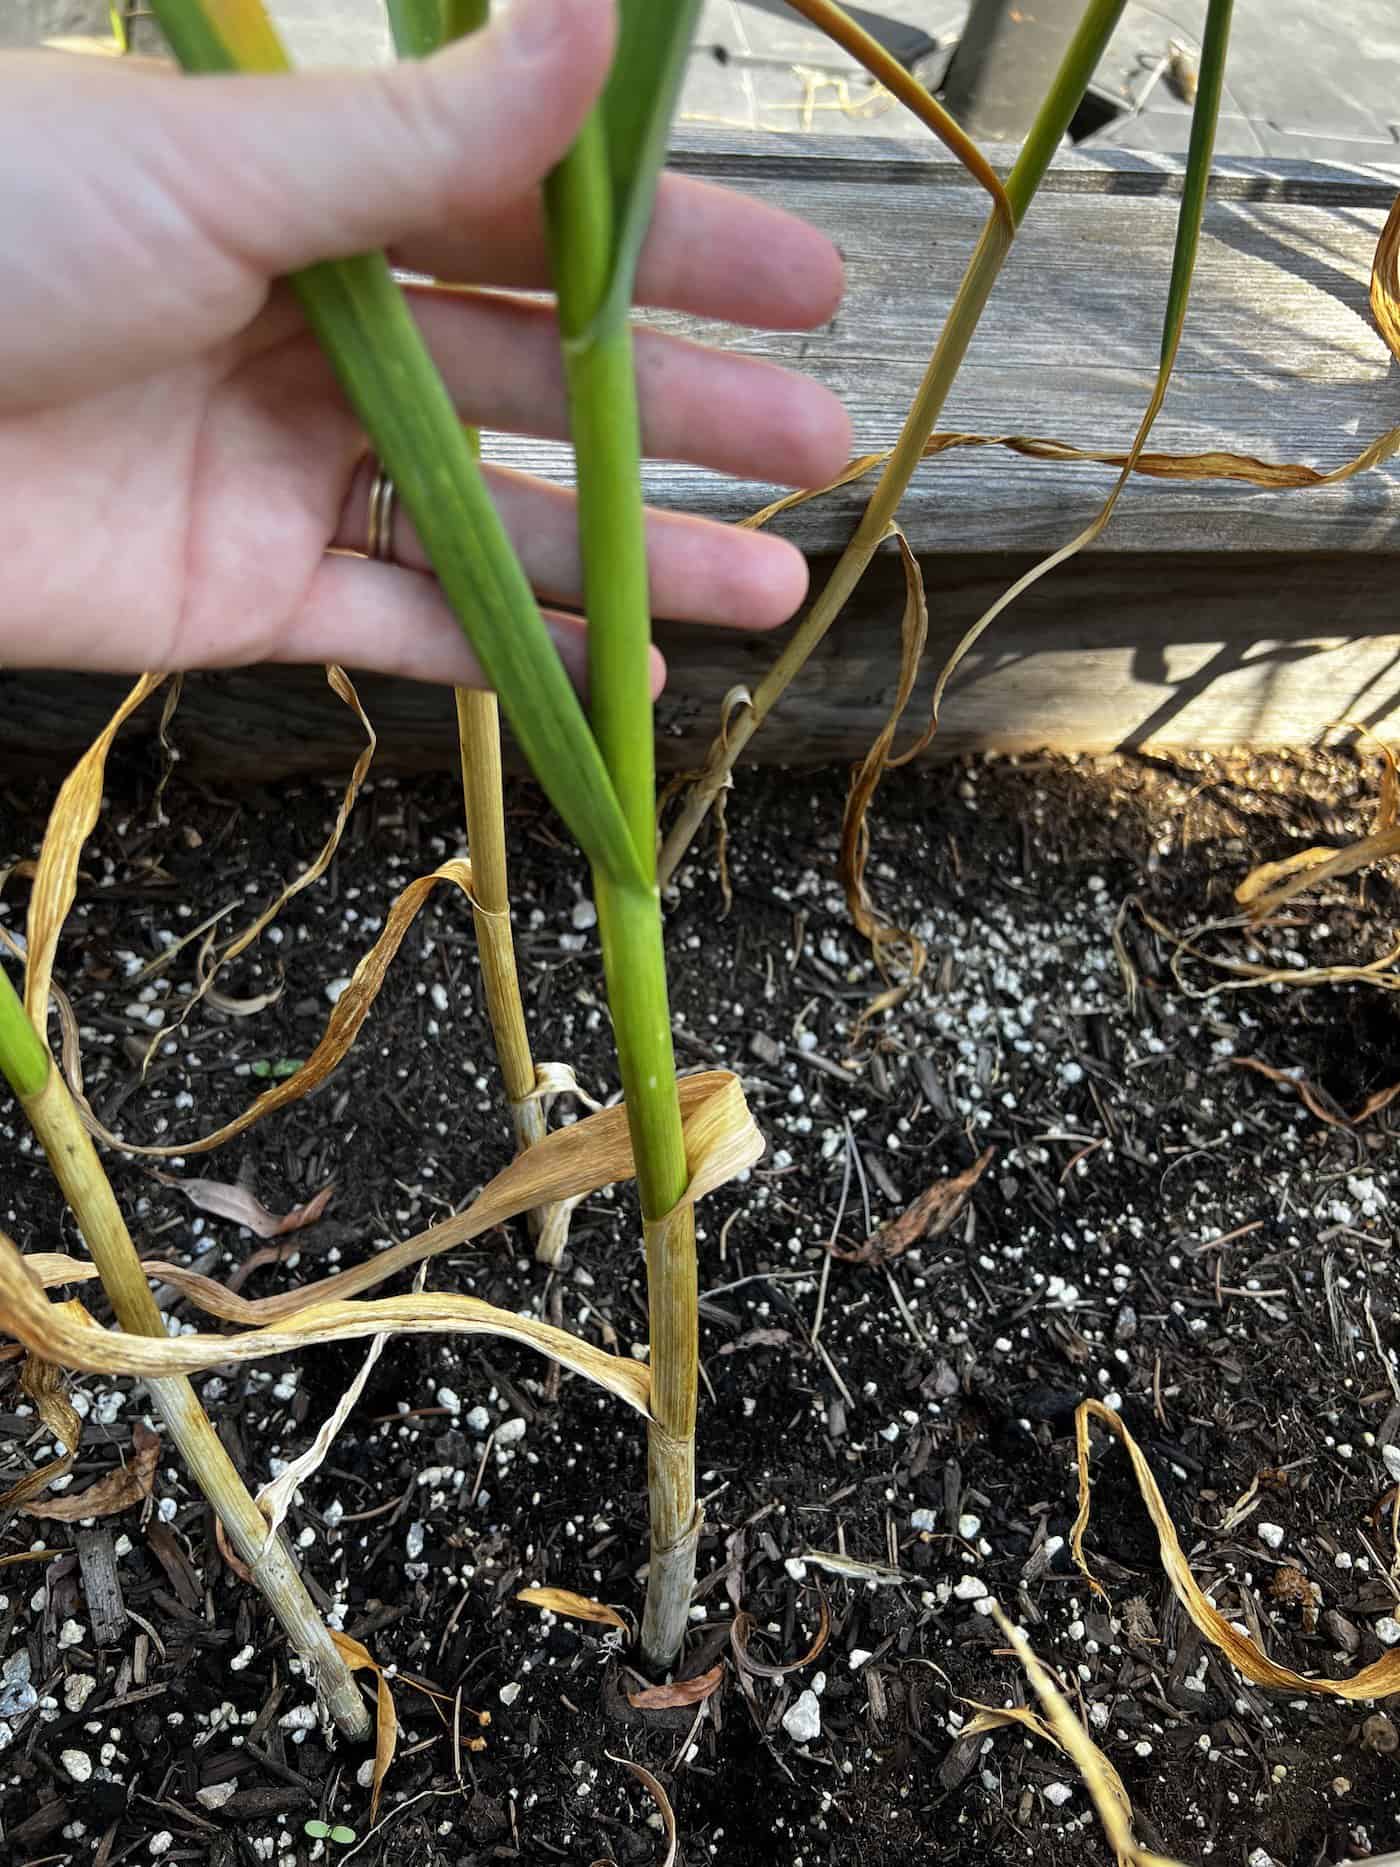 When to harvest your music garlic bulbs in the summer